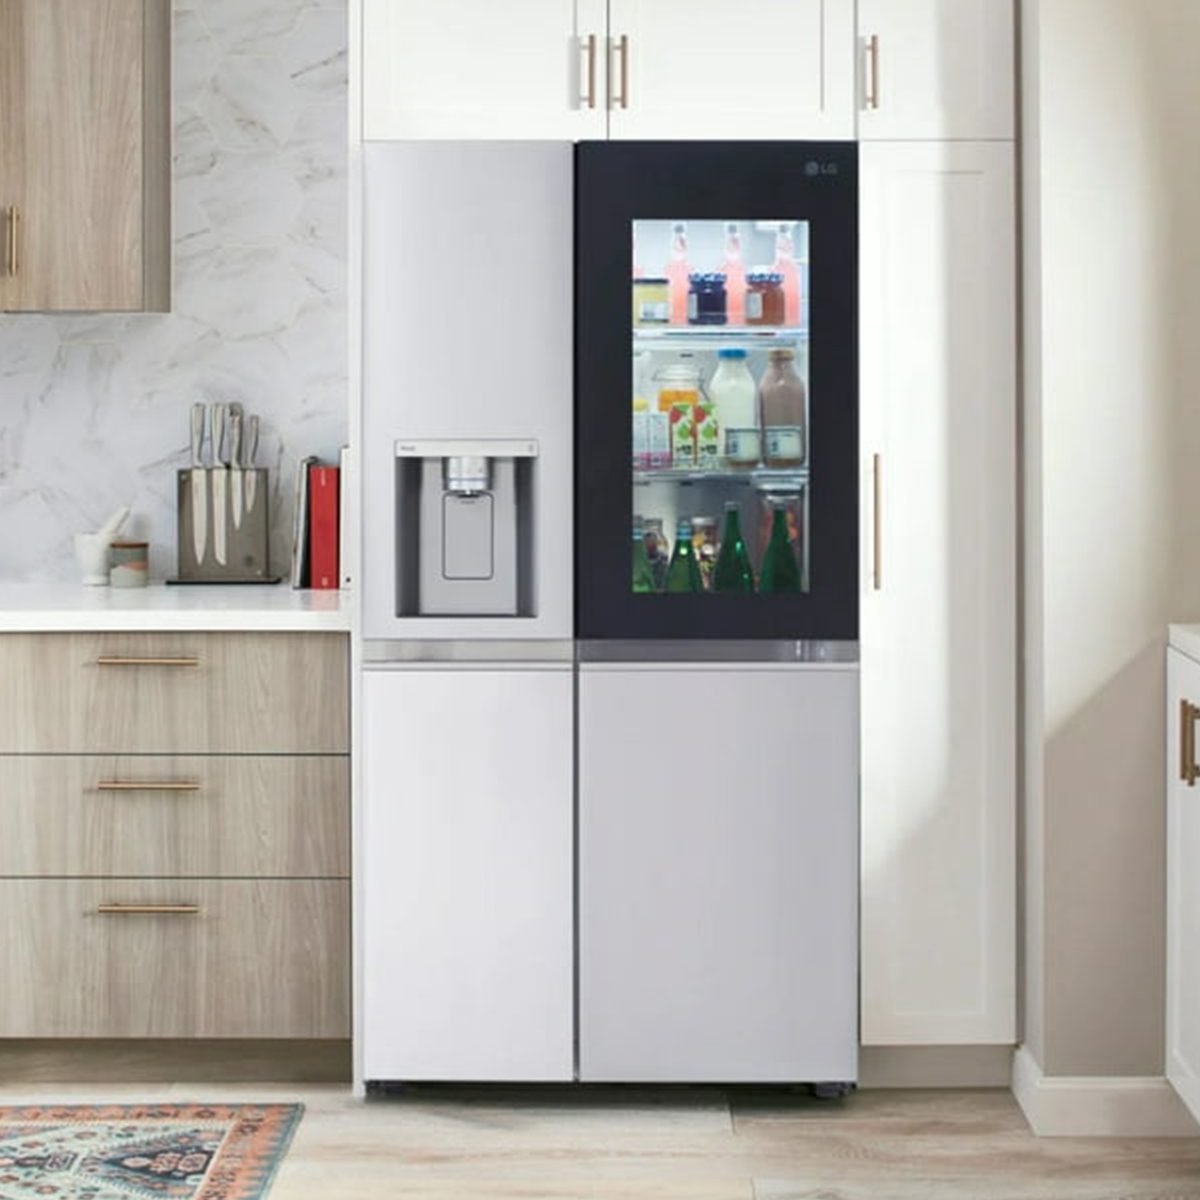 5 Most Reliable Refrigerator Brands, According to Repair Techs